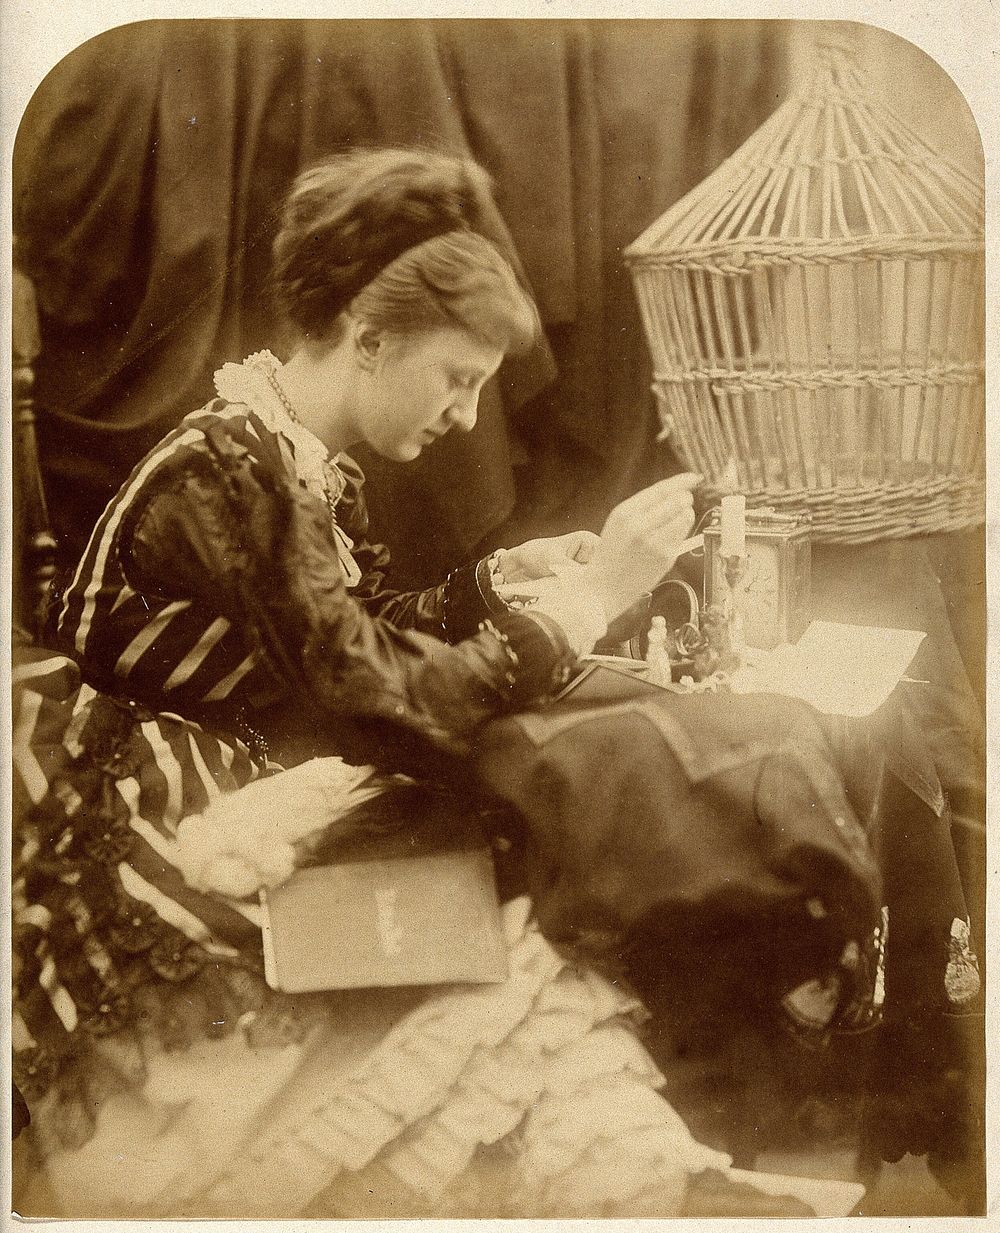 May Prinsep reading a letter. Photograph by Julia Margaret Cameron, 1870.